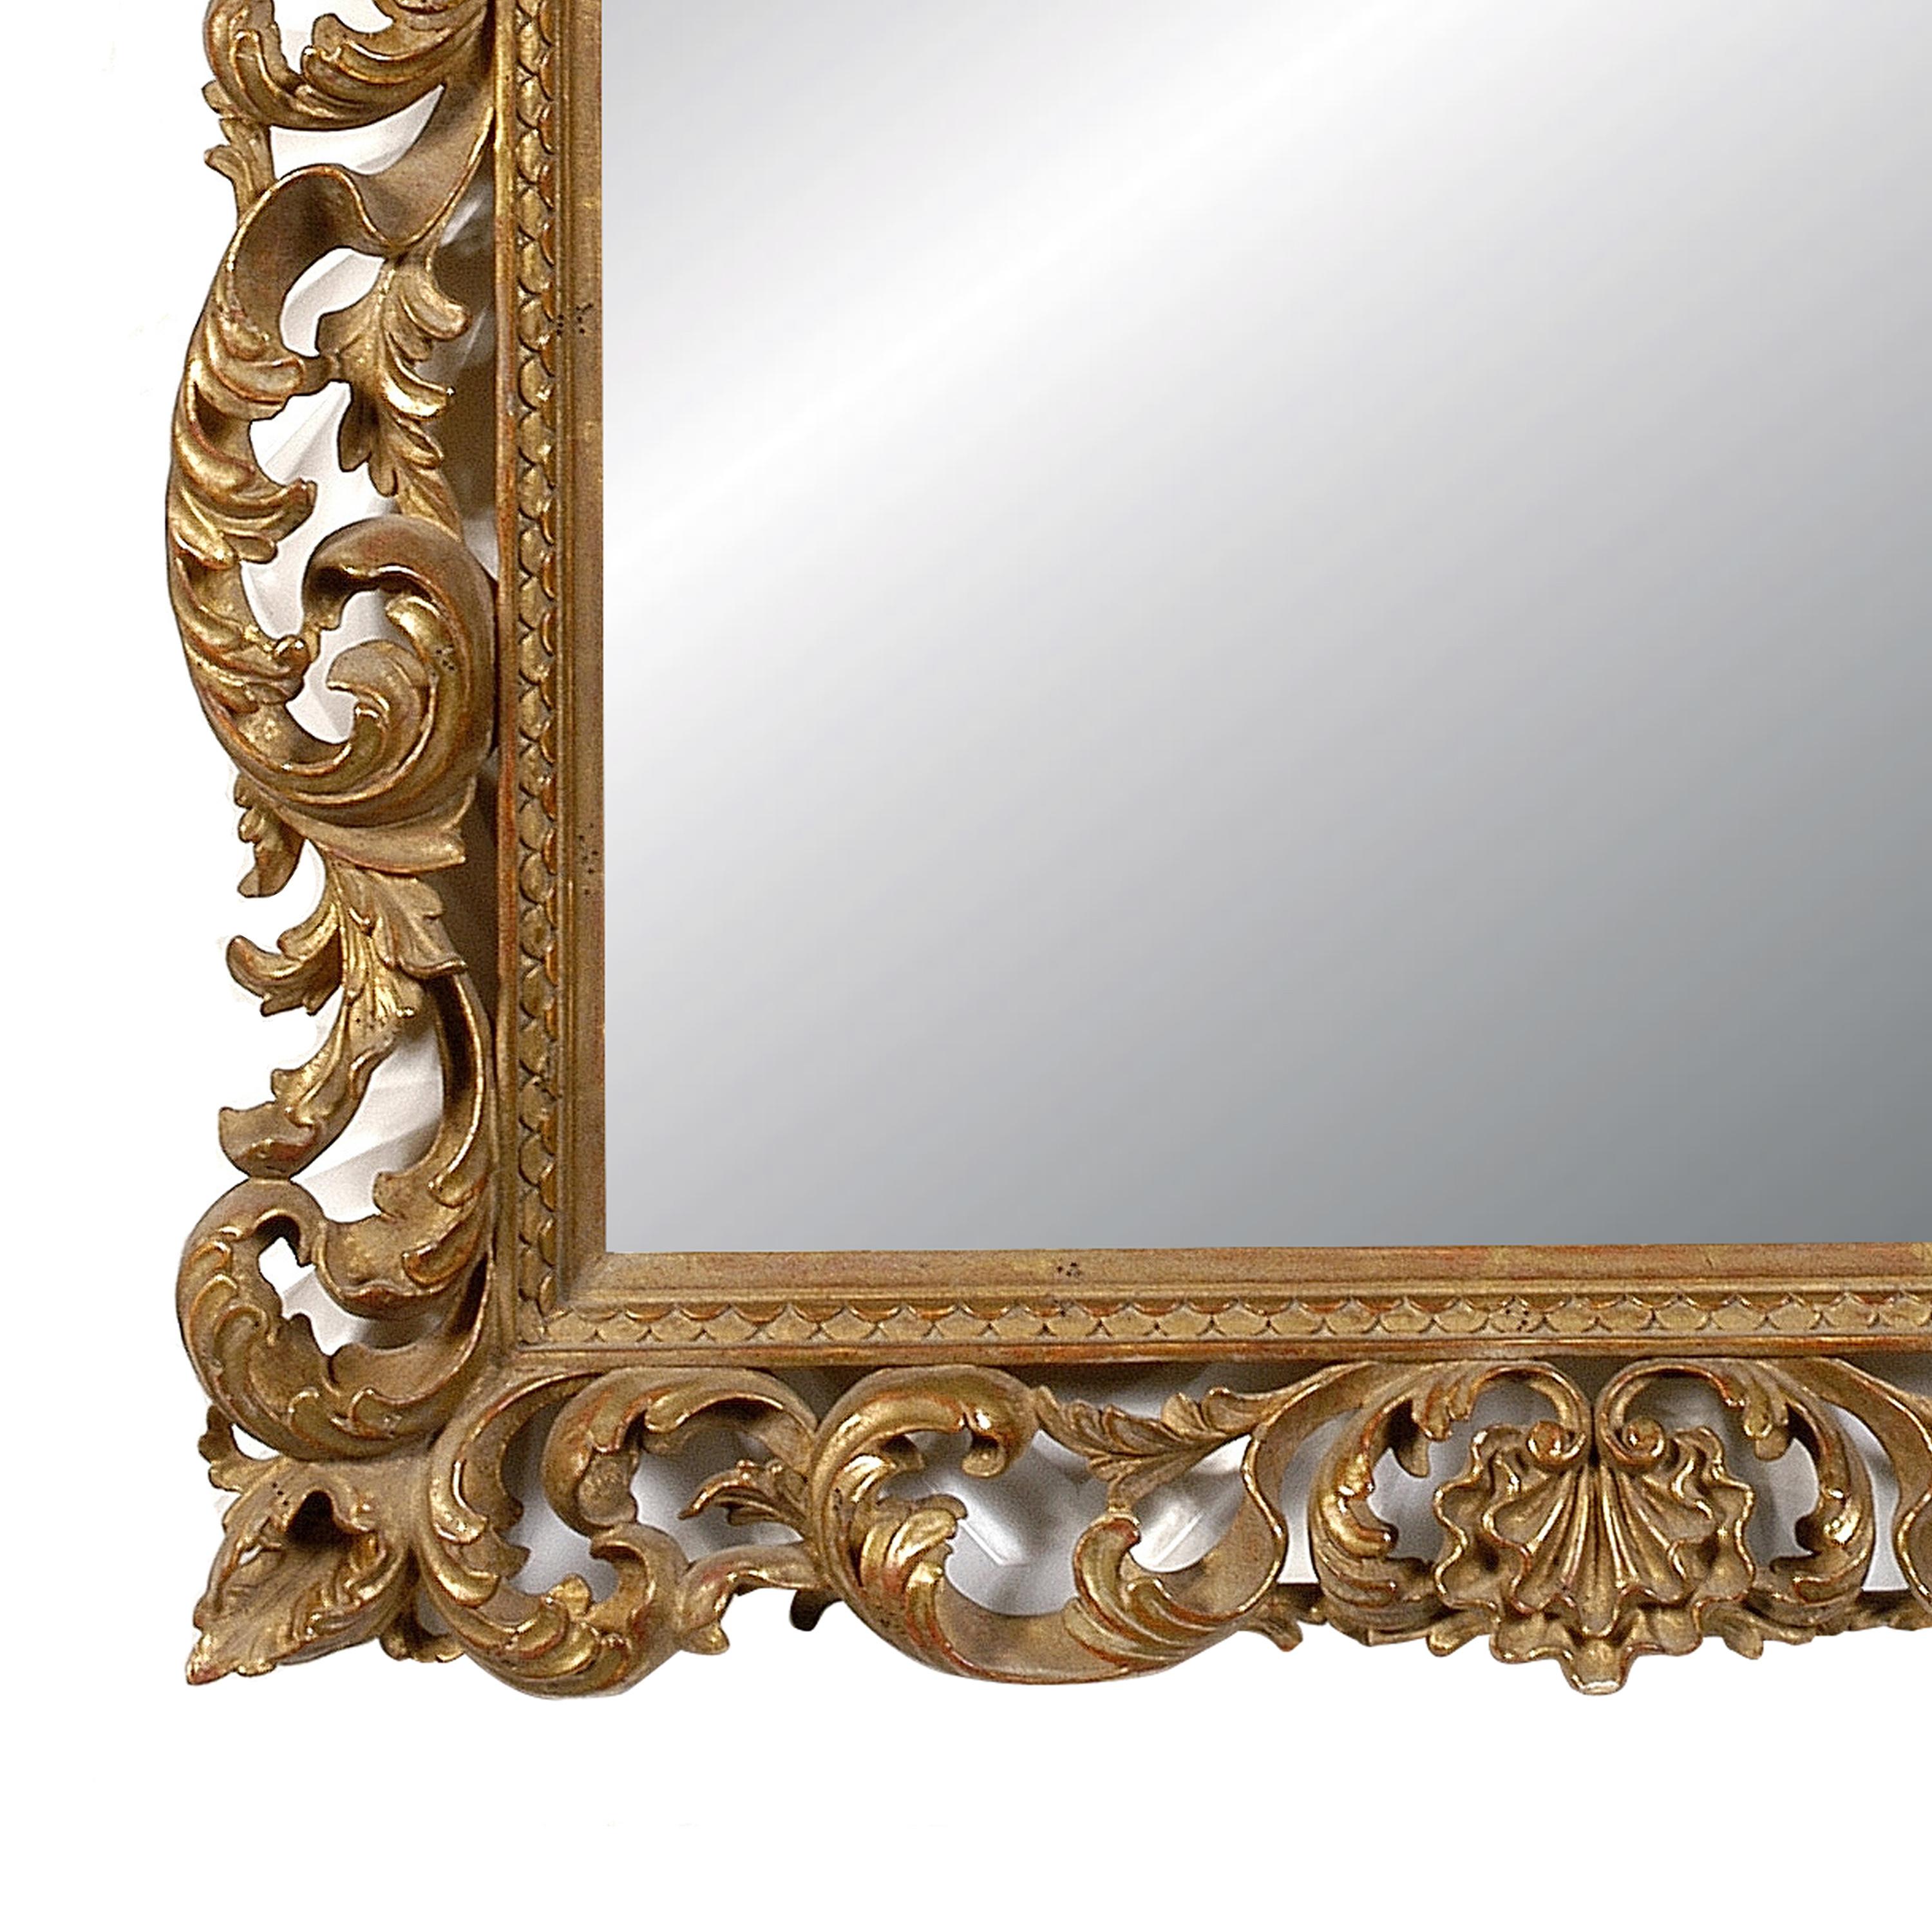 Baroque Art Nouveau Style Rectangular Gold Foil Hand Carved Wooden Mirror, 1970